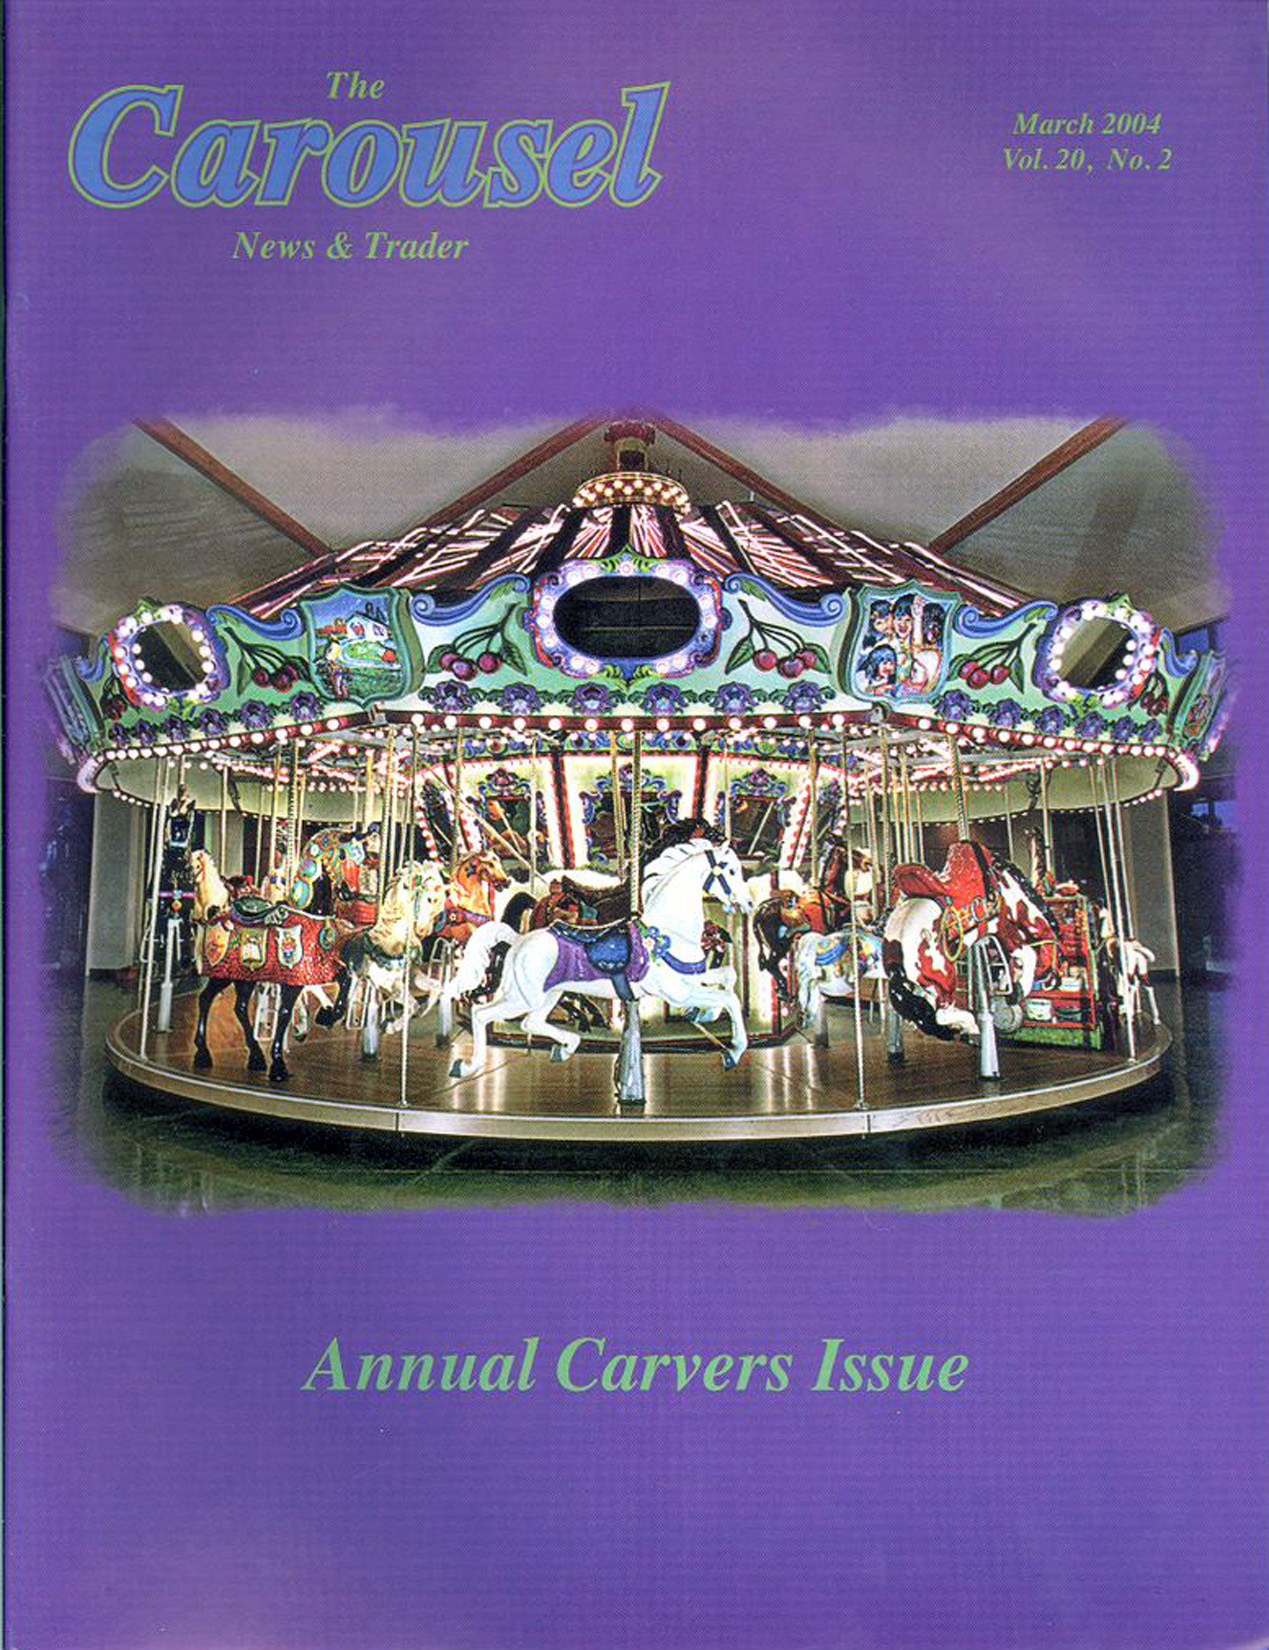 cnt_03_2004-newly-carved-Salem-OR-Riverfront-carousel